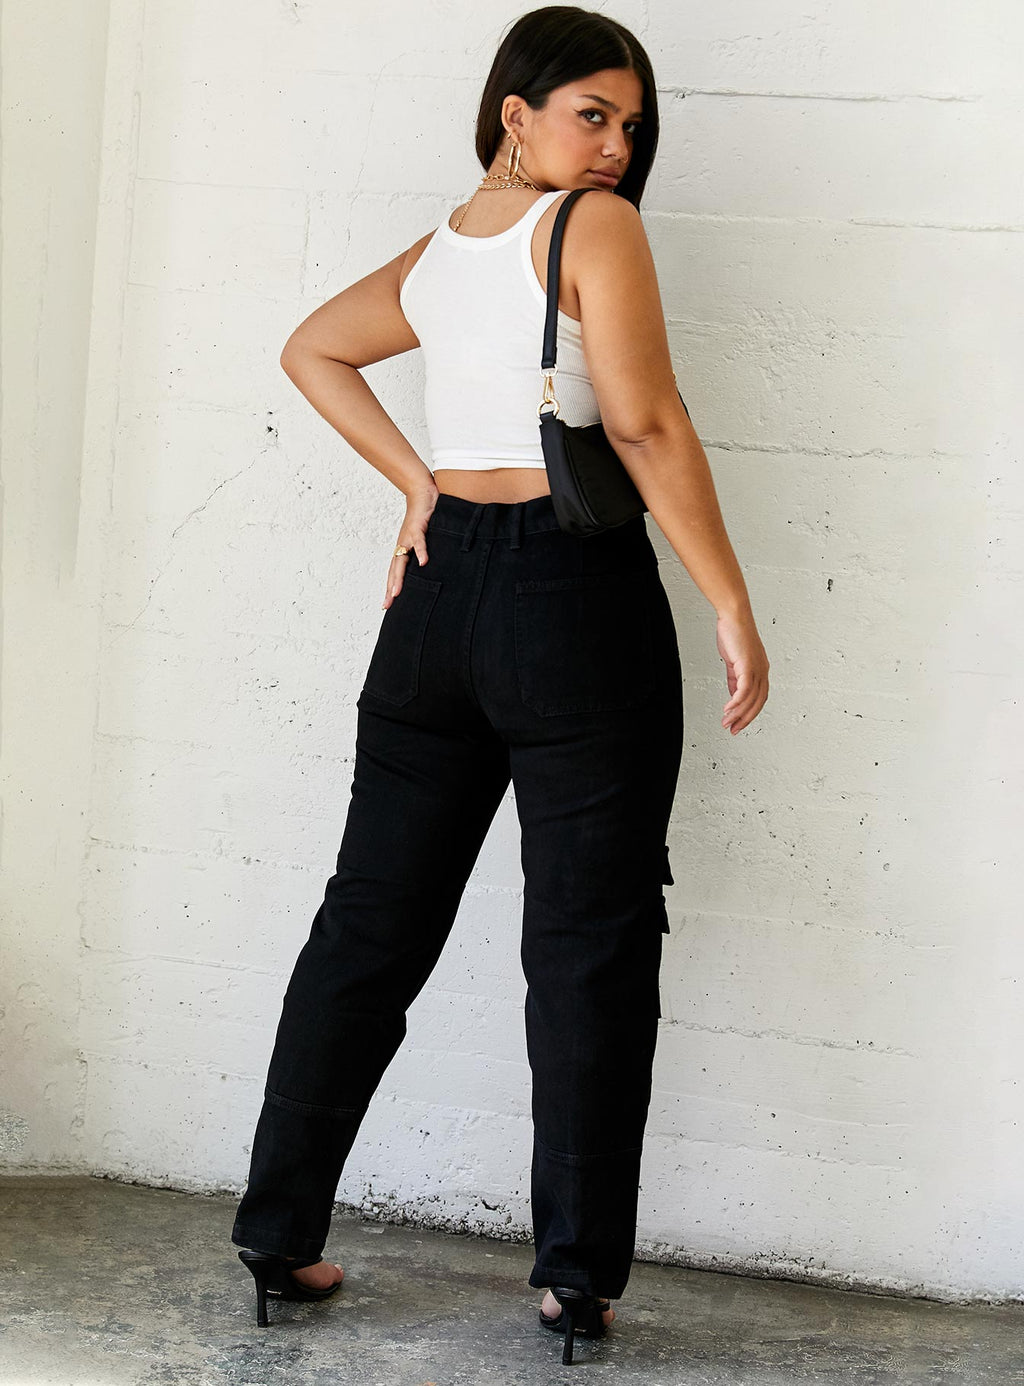 The Stacey Jeans Black